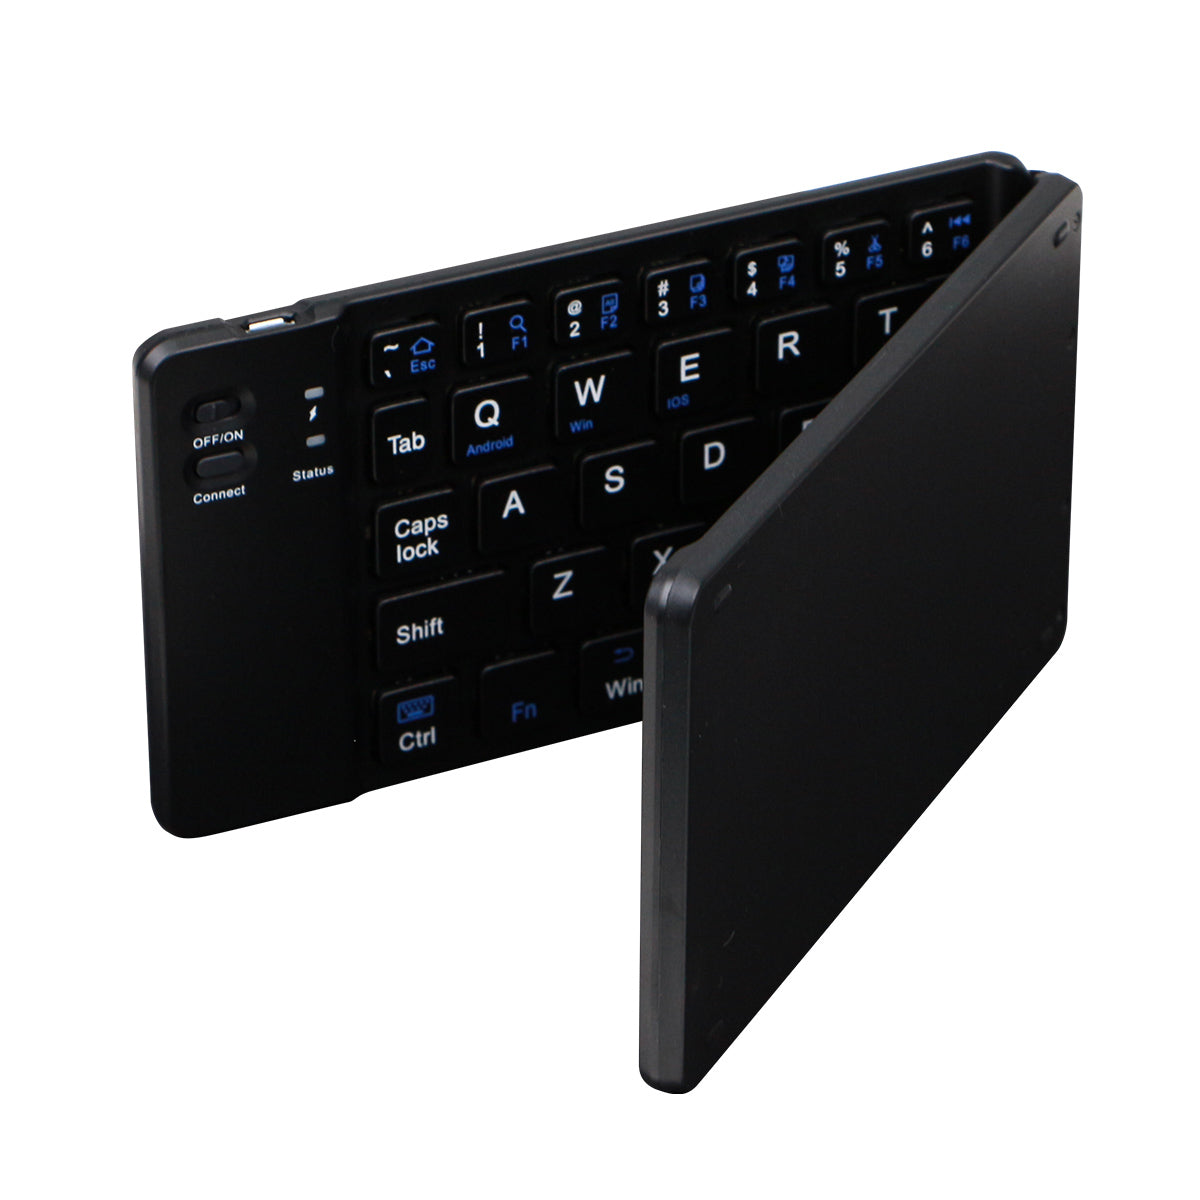 Ultra Slim Portable Bluetooth Foldable Keyboard Rechargeable Battery Travel Keyboard for iOS/Mac, Android, Windows Devices